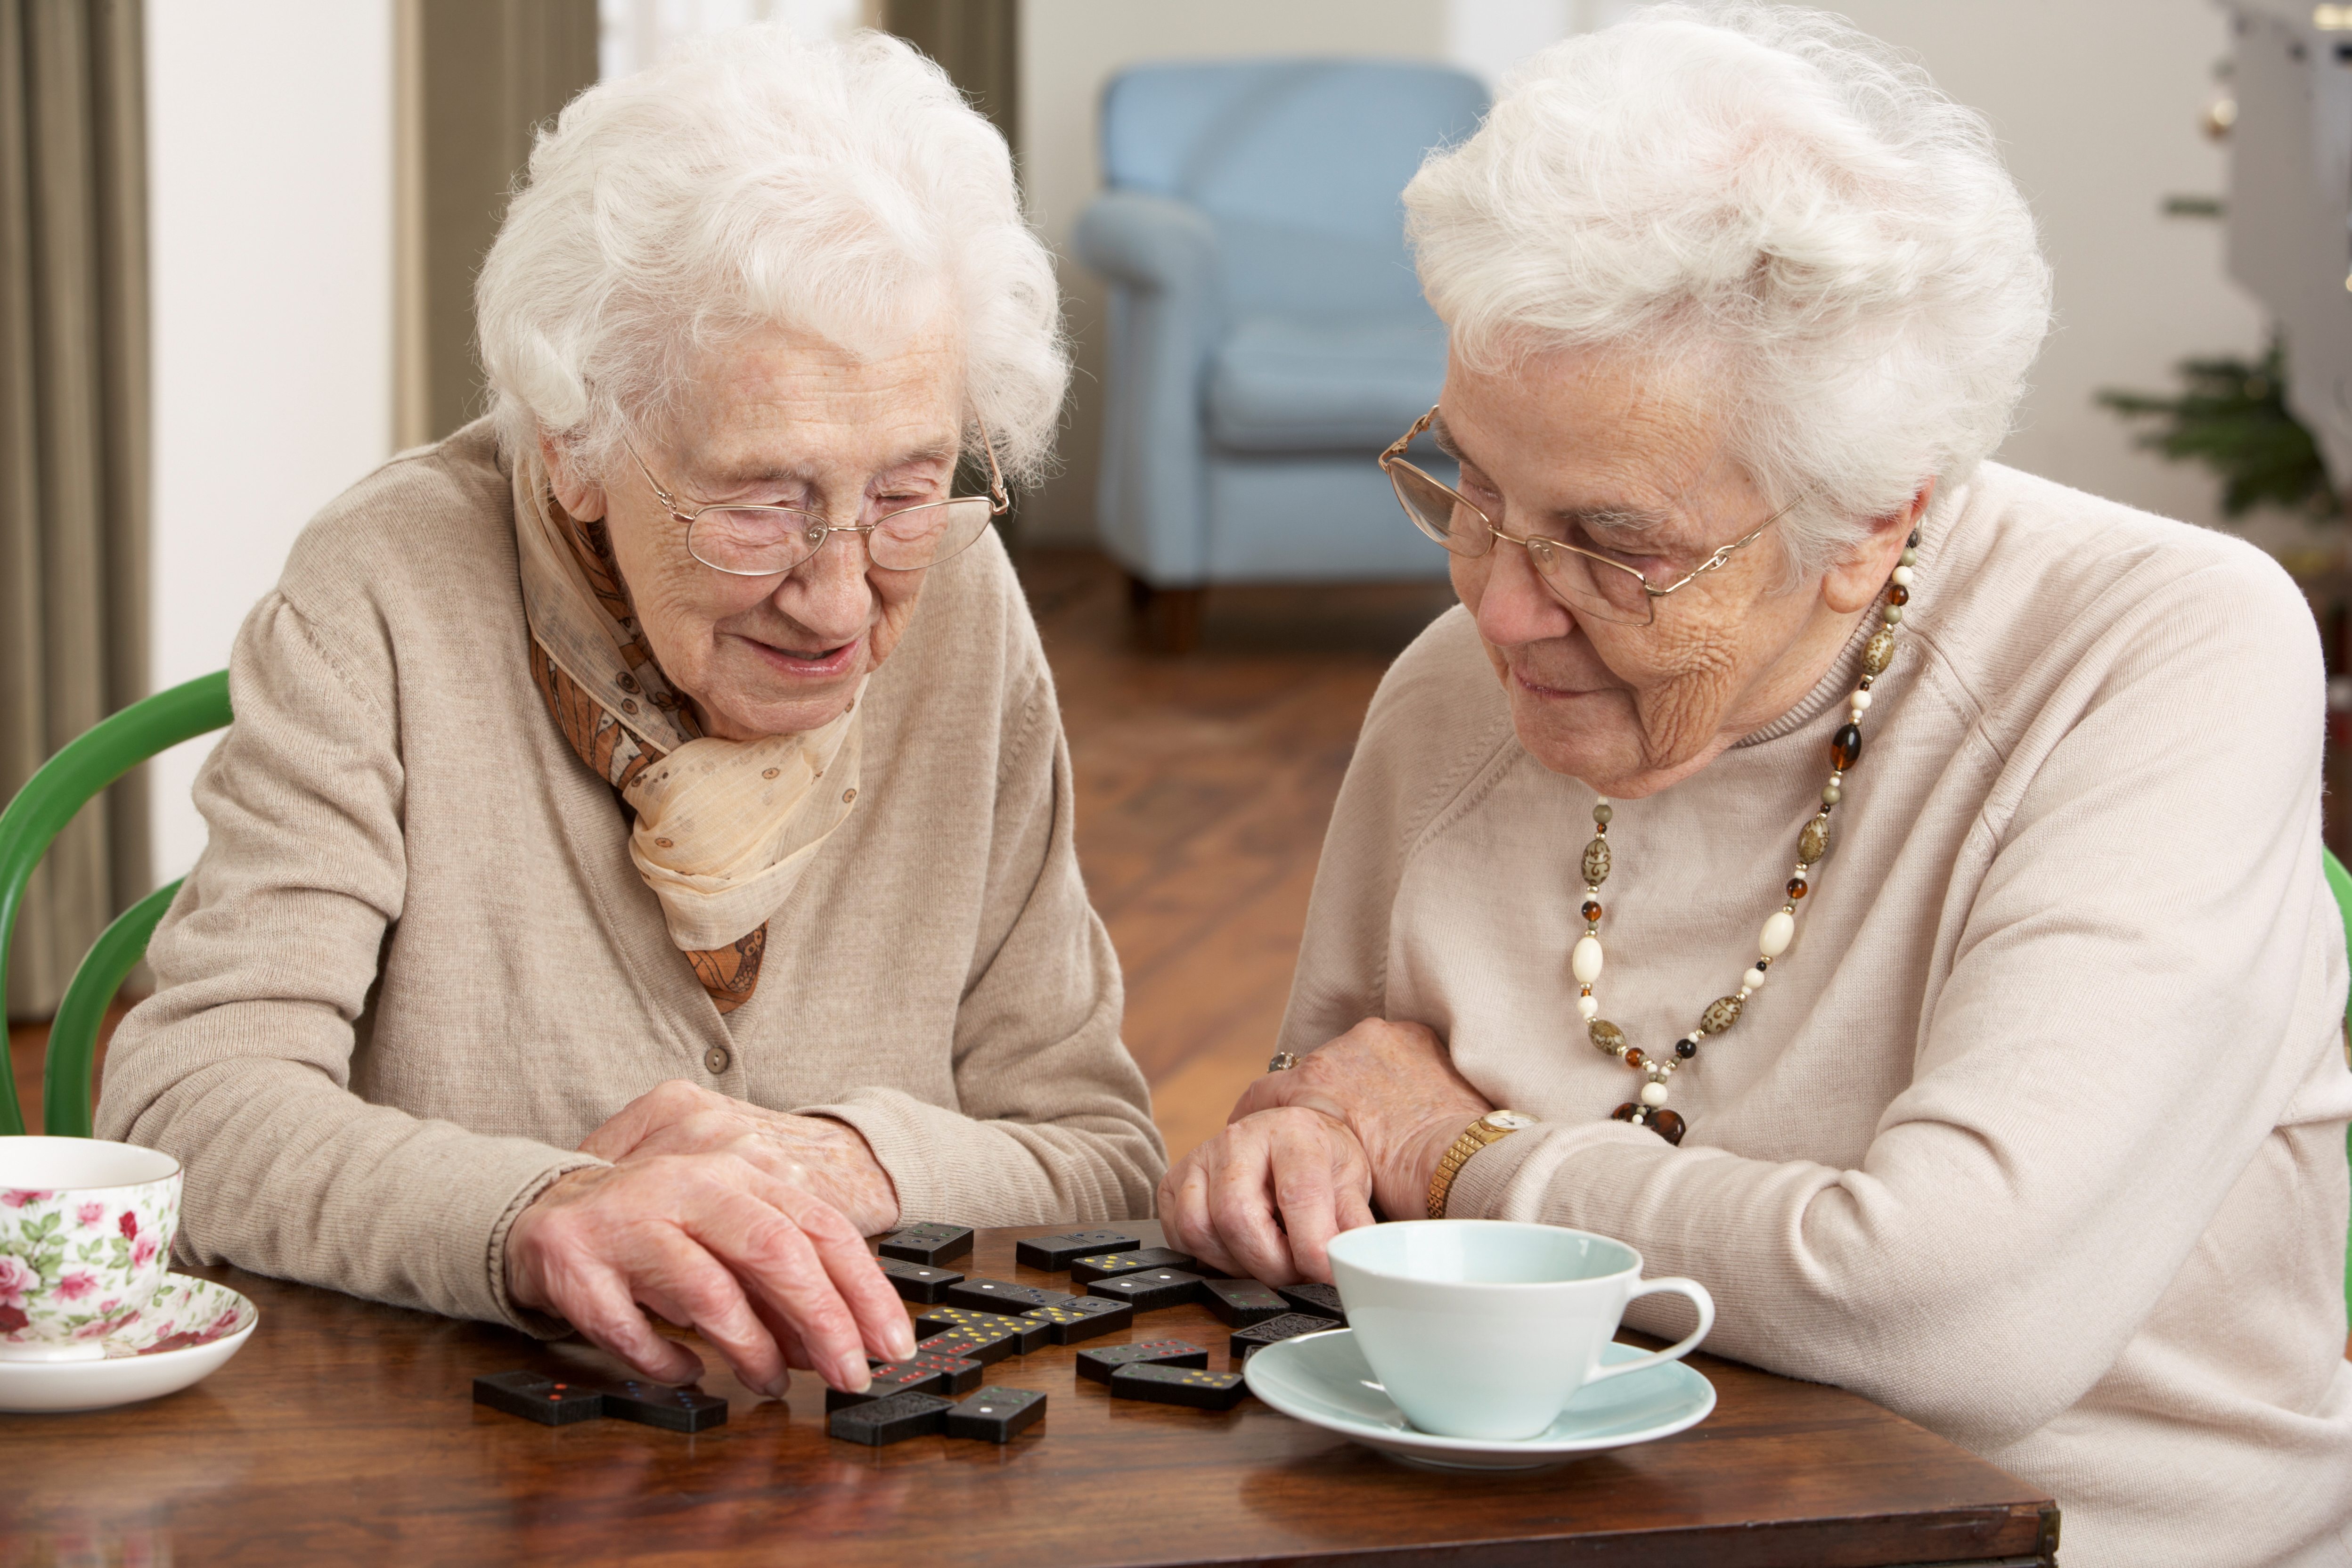 Help Shape the Future Direction of Seniors Care with Online Survey